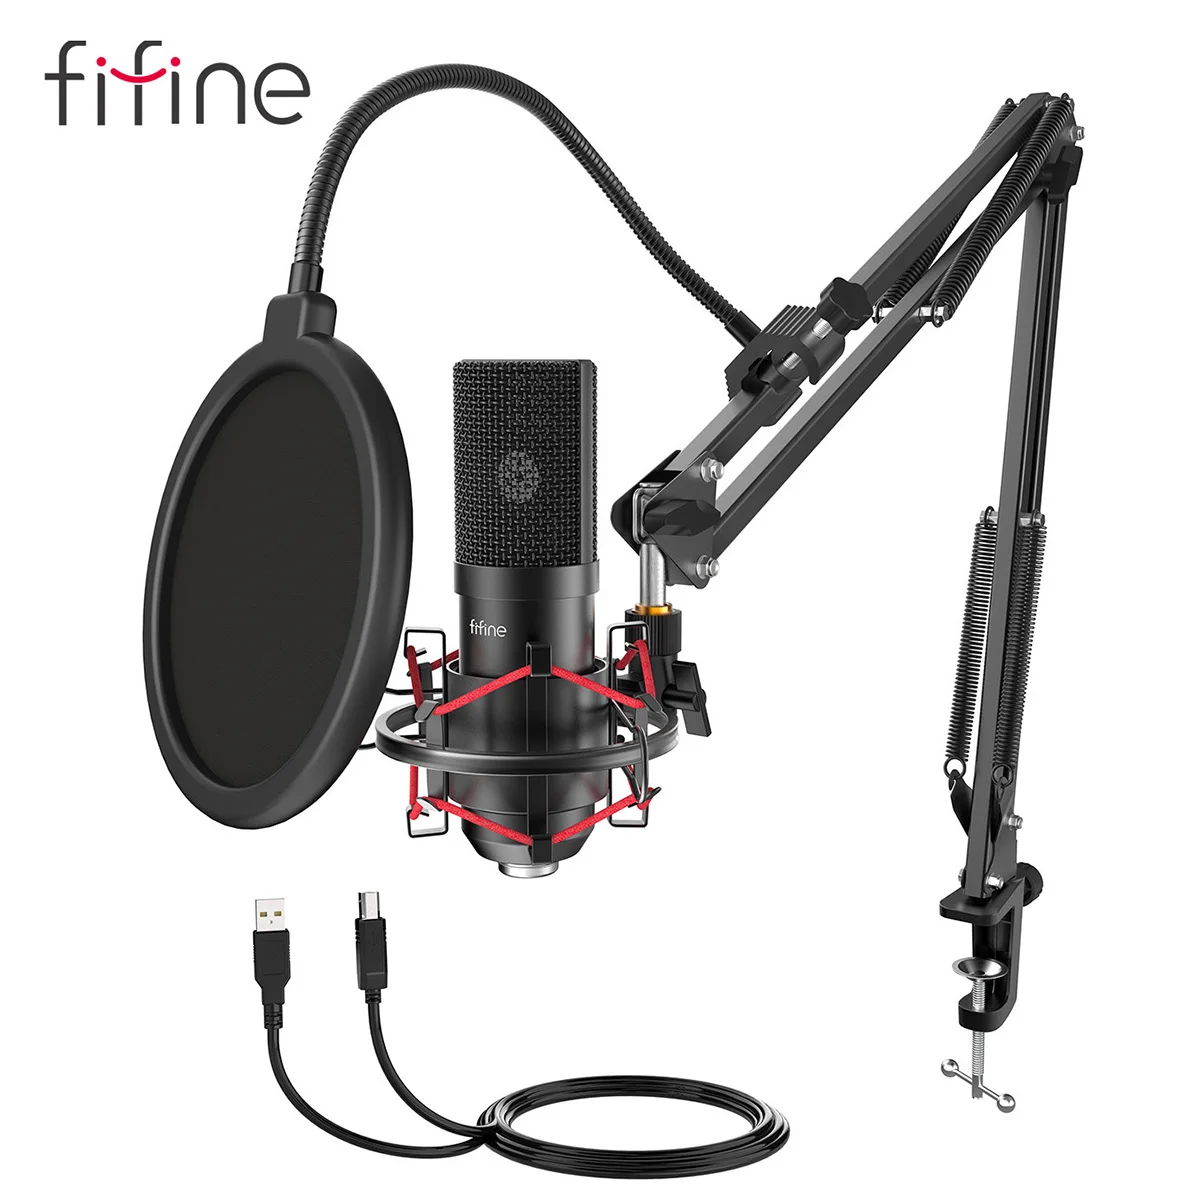 FIFINE USB Gaming Microphone Set with Flexible Arm Stand Pop Filter Plug&Play with PC Laptop Computer Streaming Podcast Mic T732